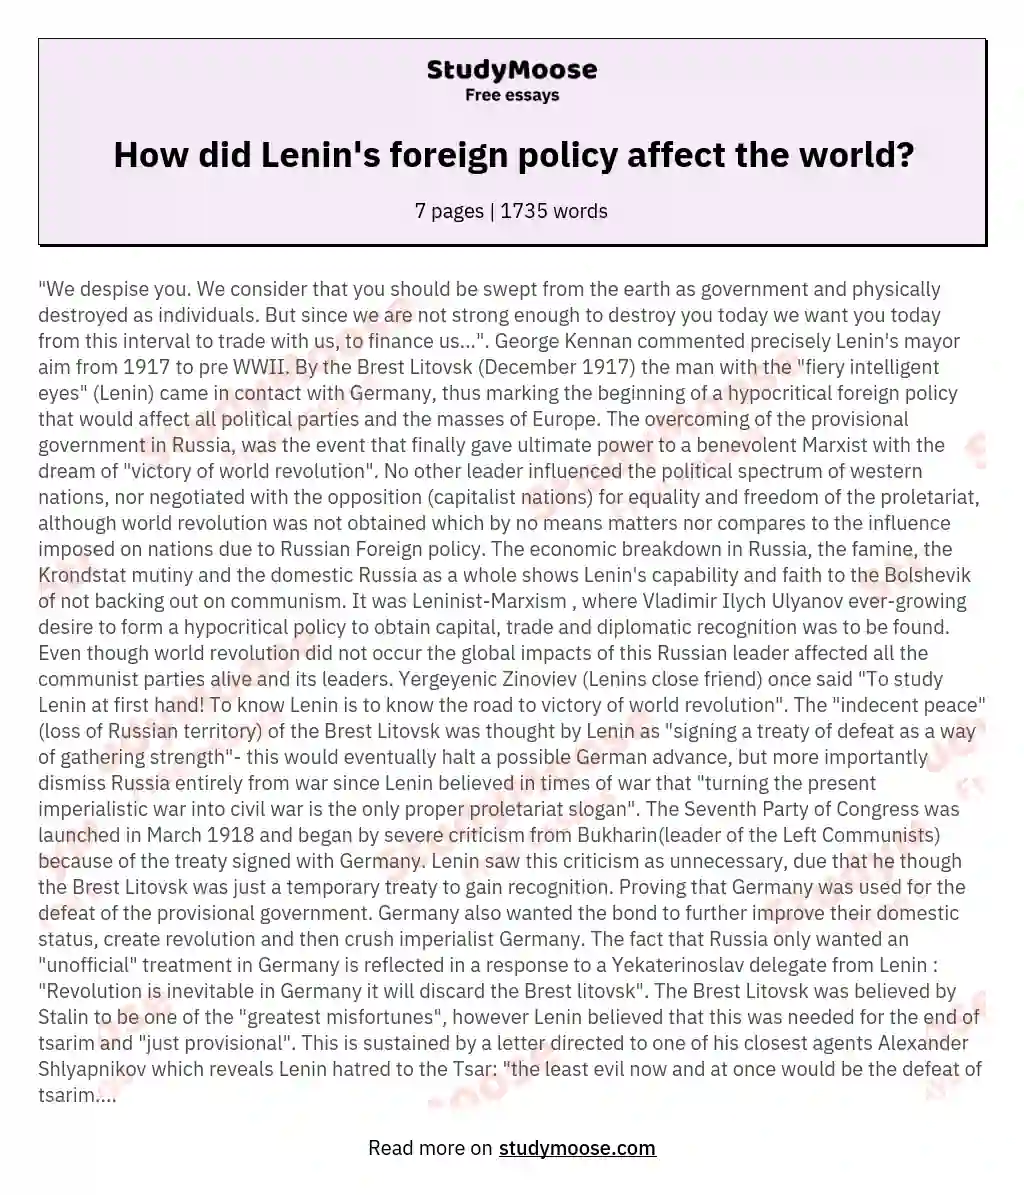 How did Lenin's foreign policy affect the world?